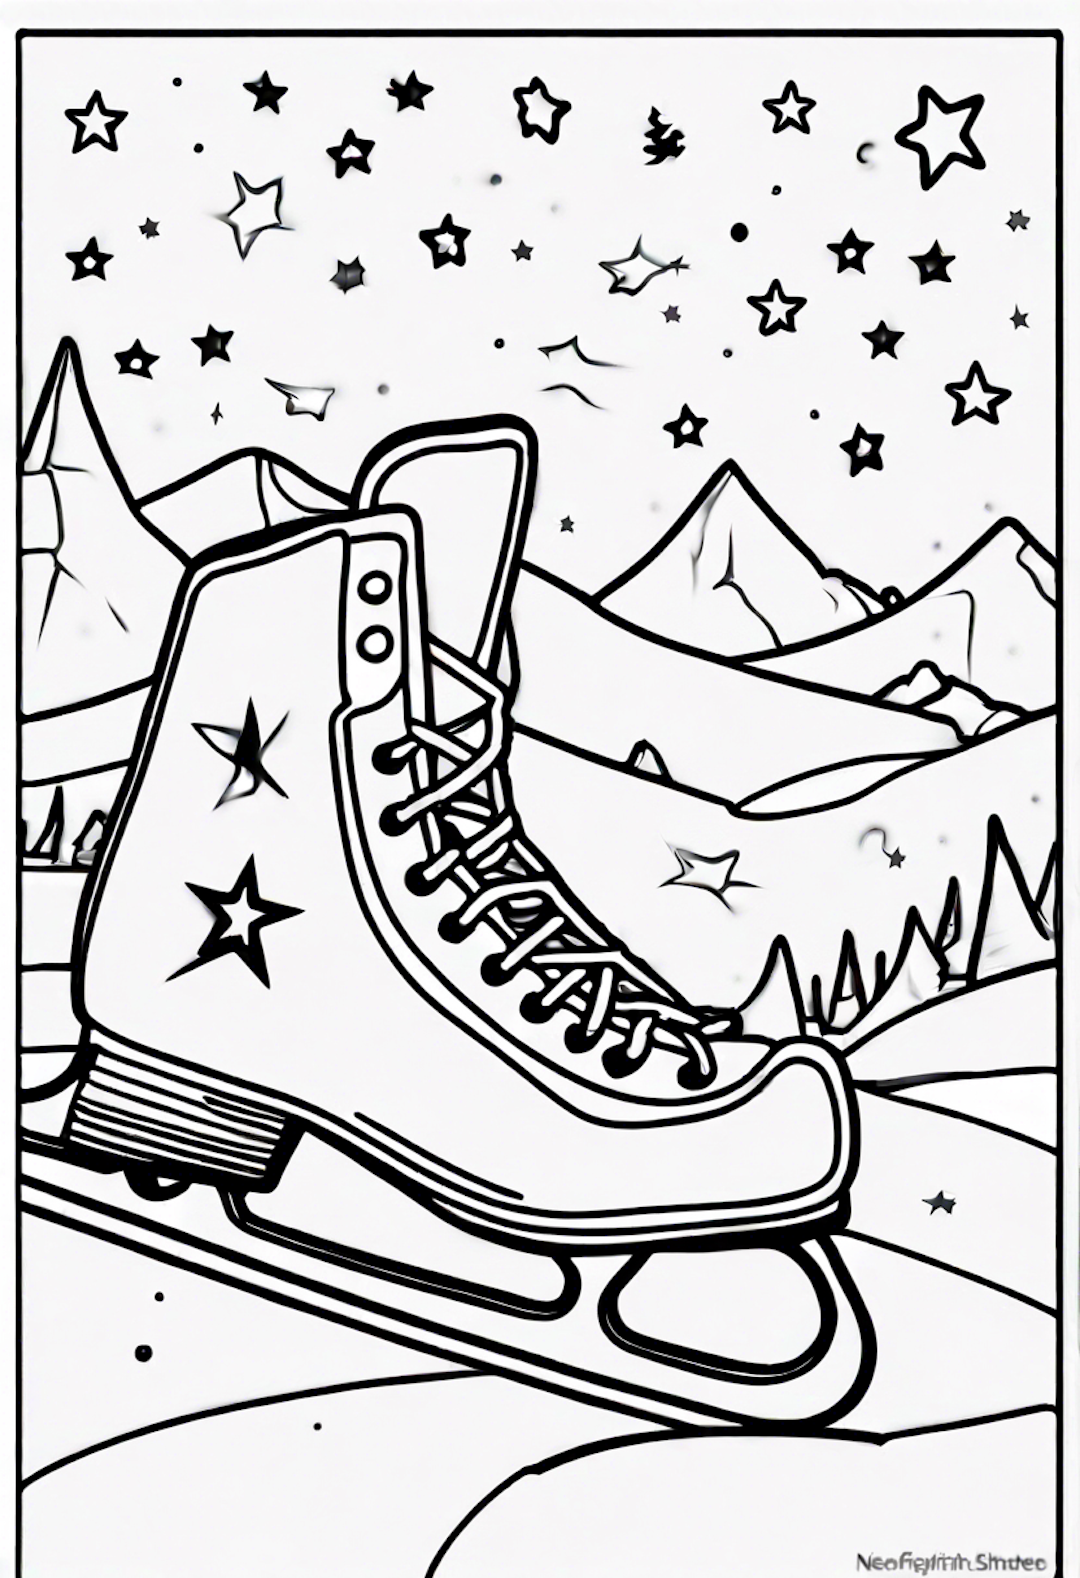 Sixteen Happy Stars Ice Skating On A Frozen Comet